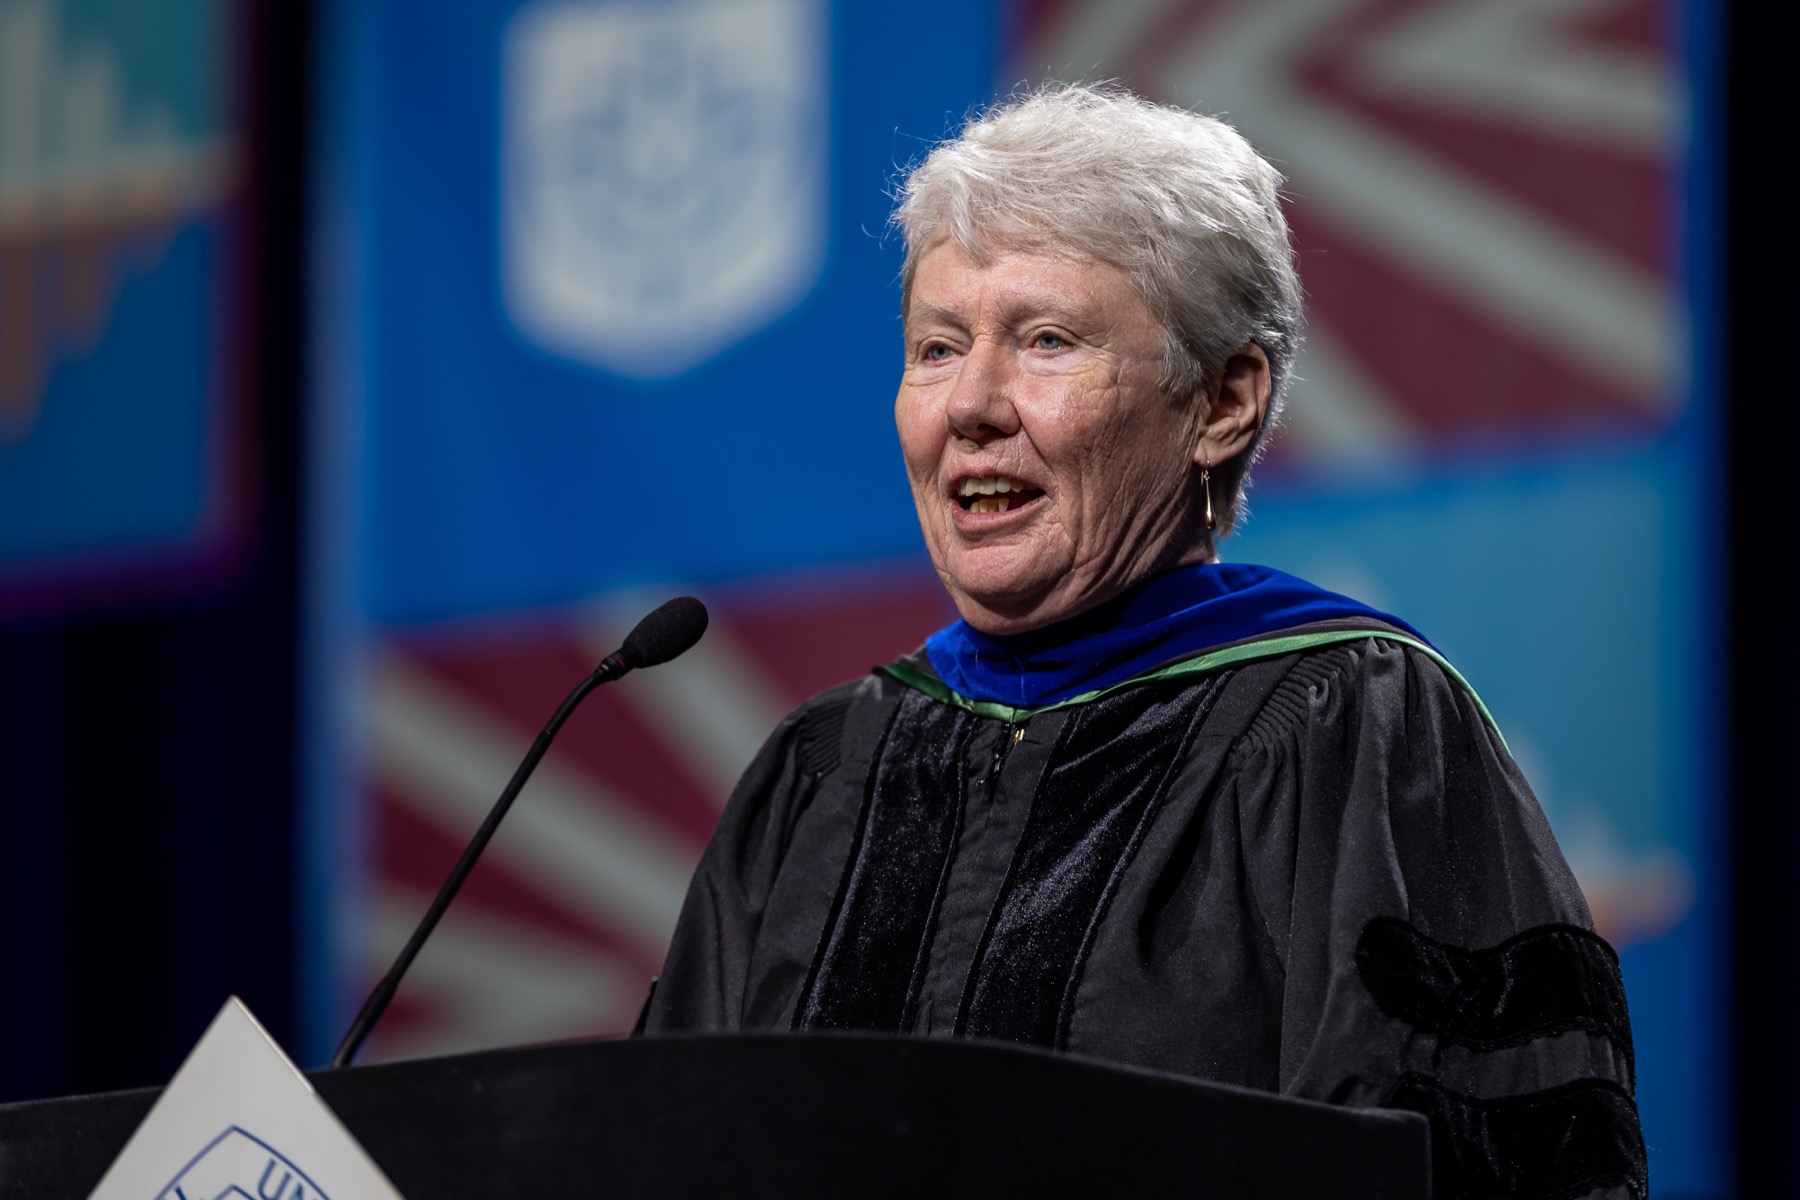 Dr. Maria Klawe, president of Harvey Mudd College, addressed the graduates at The Theatre School and the Jarvis College of Computing and Digital Media commencement ceremony.